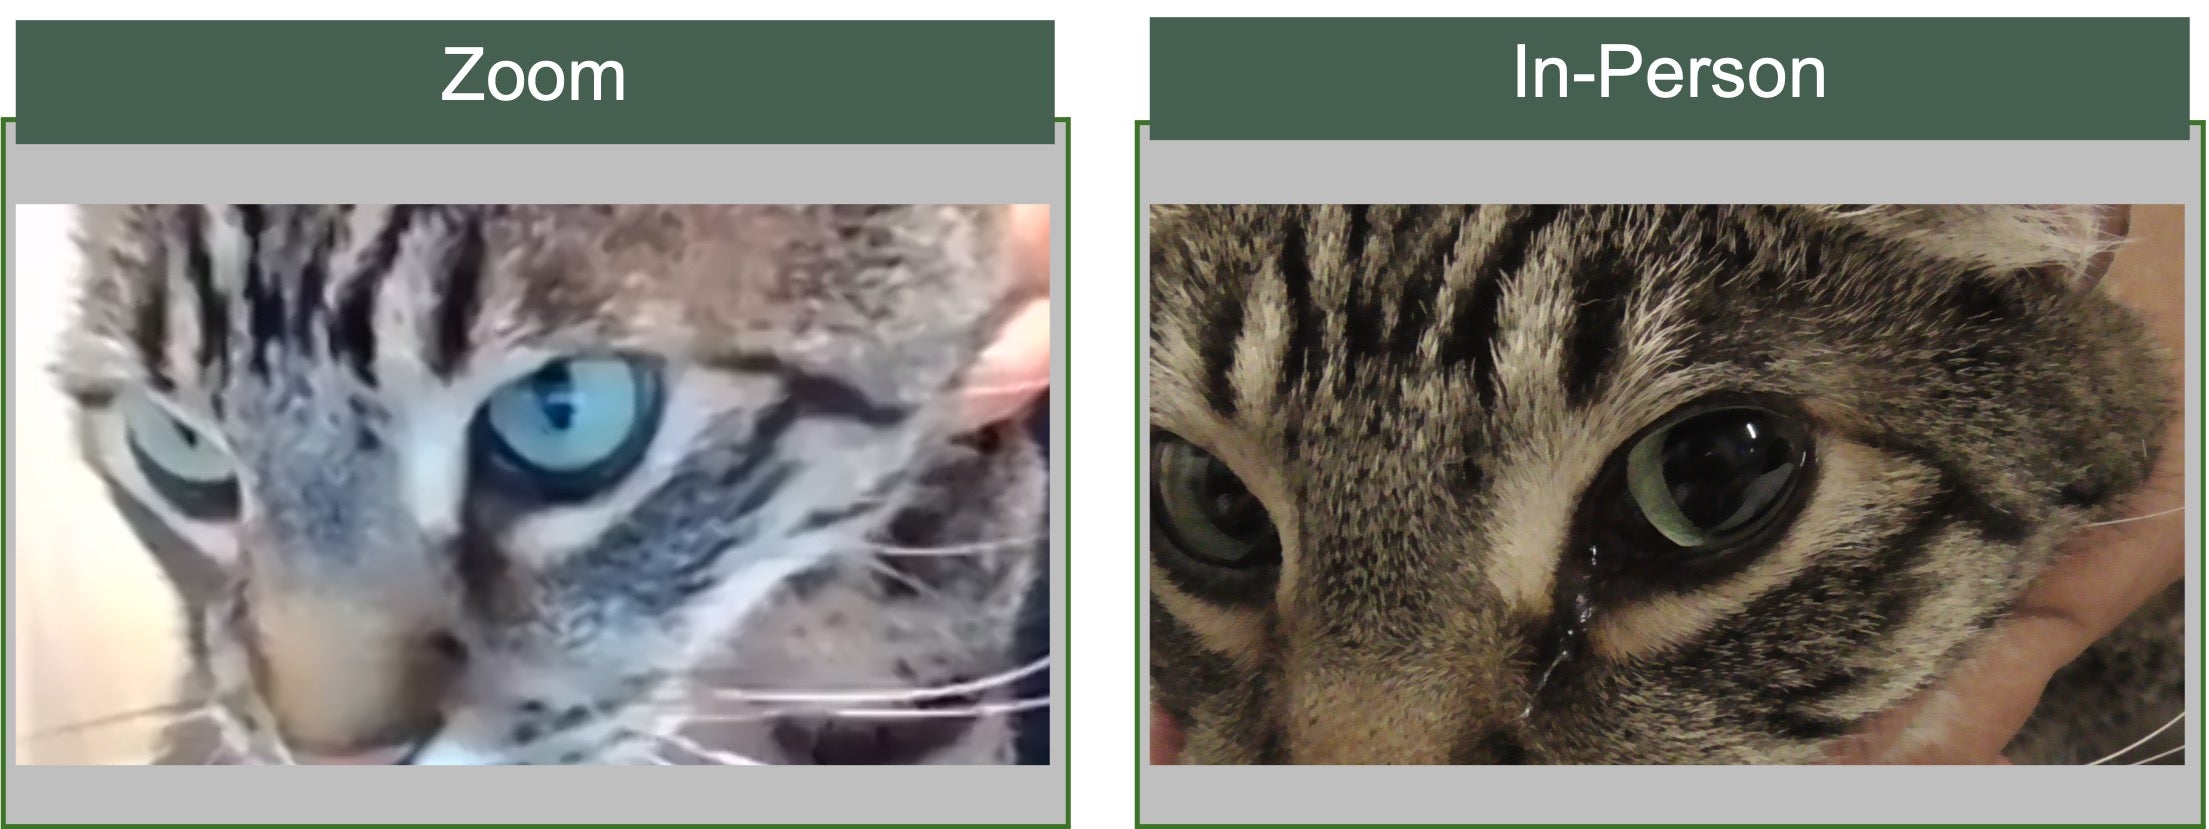 The cat on the left is having a virtual veterinary appointment. The cat on the right is having an in-person exam. The cat on the right shows dilated pupils, which is a sign of stress.